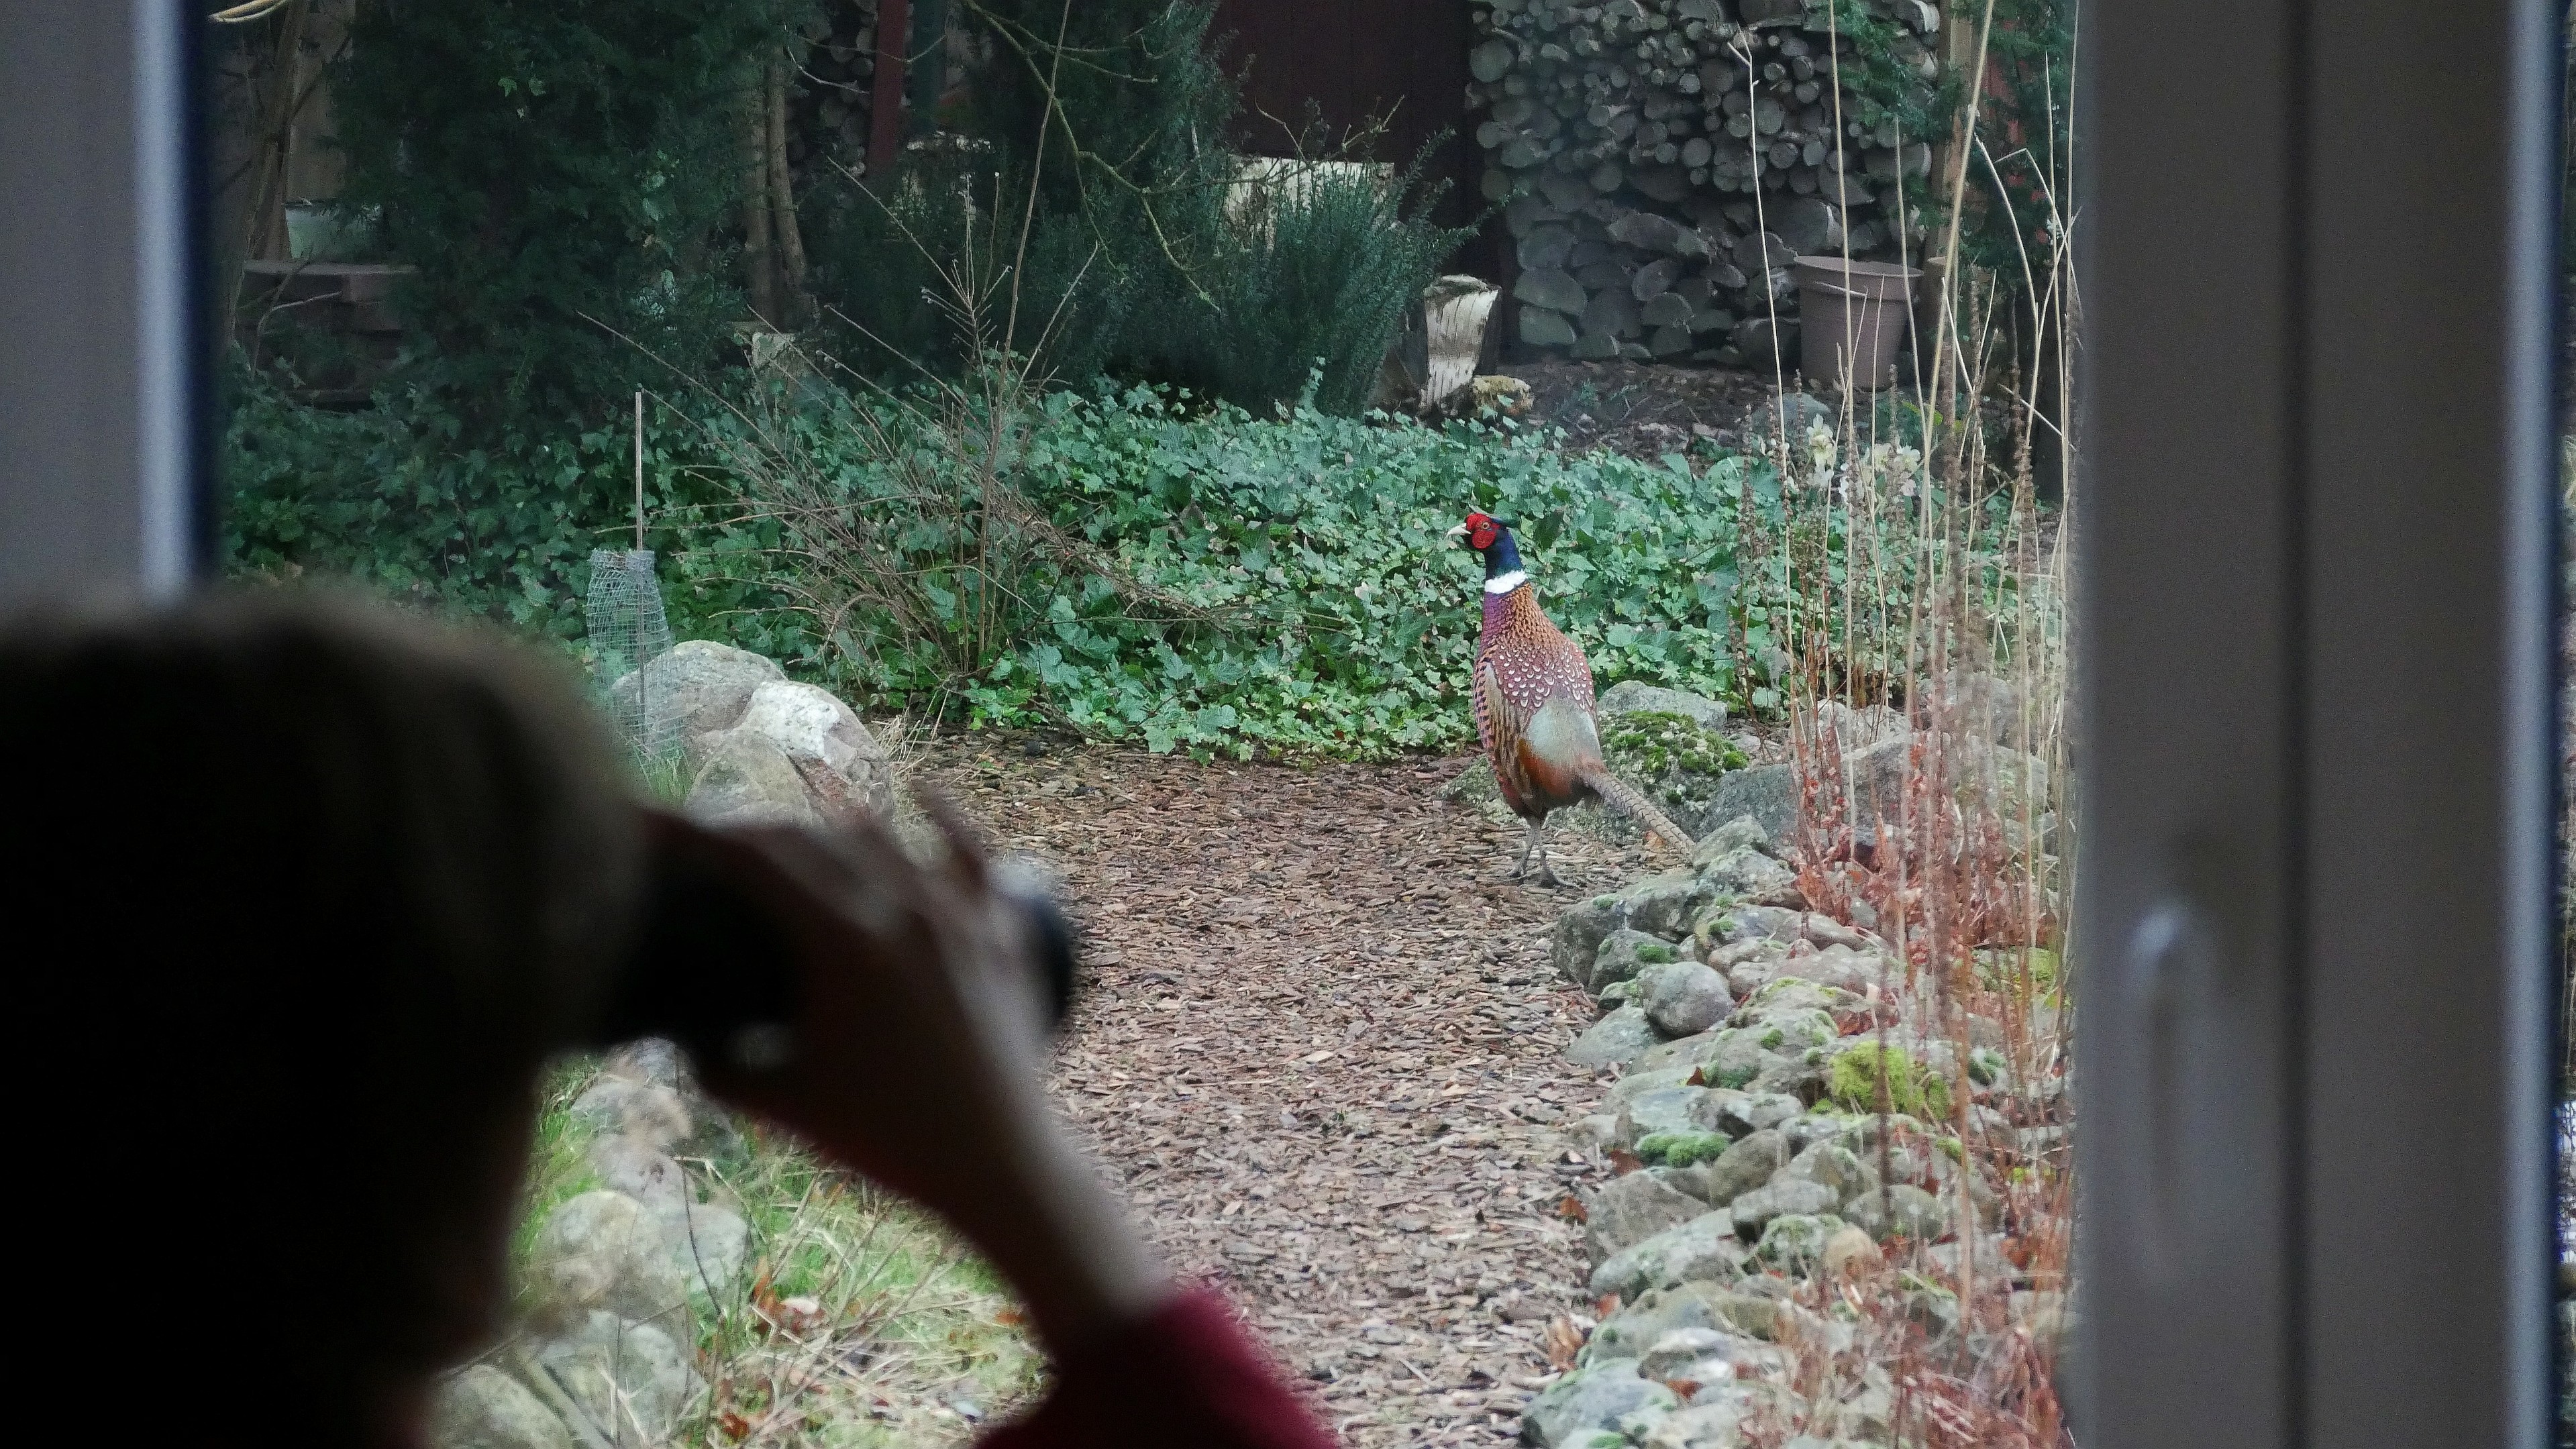 look out of a window onto a male pheasant on a path made of woodchip. Blured brunette figure looking at the pheasant with binoculars.